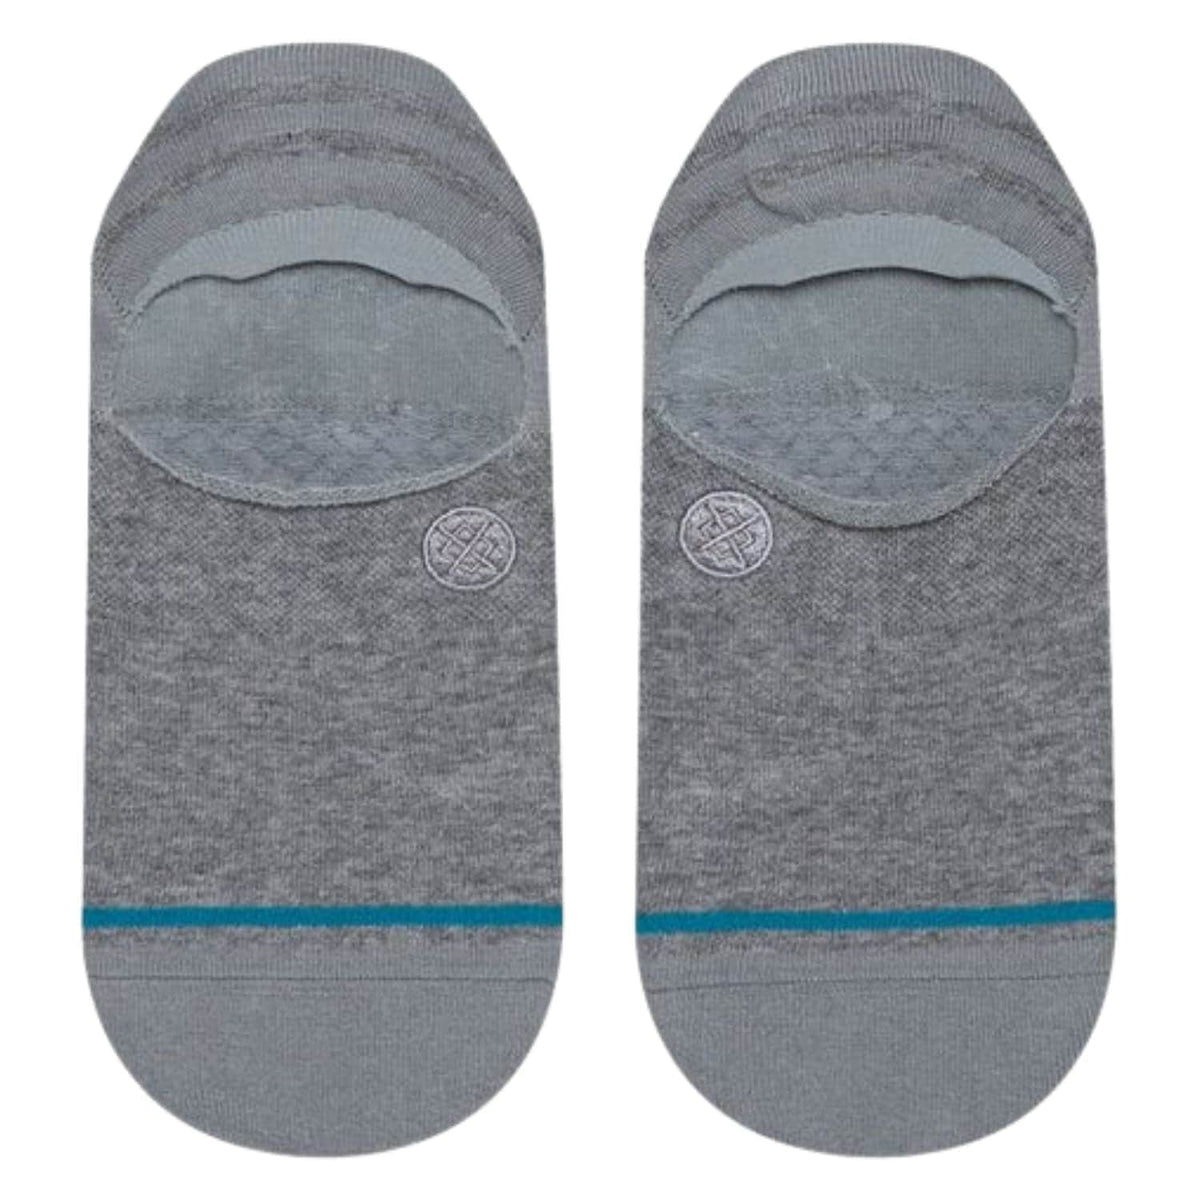 Stance Gamut 2 Invisible Socks - Grey Heather - Mens Invisible/No Show Socks by Stance